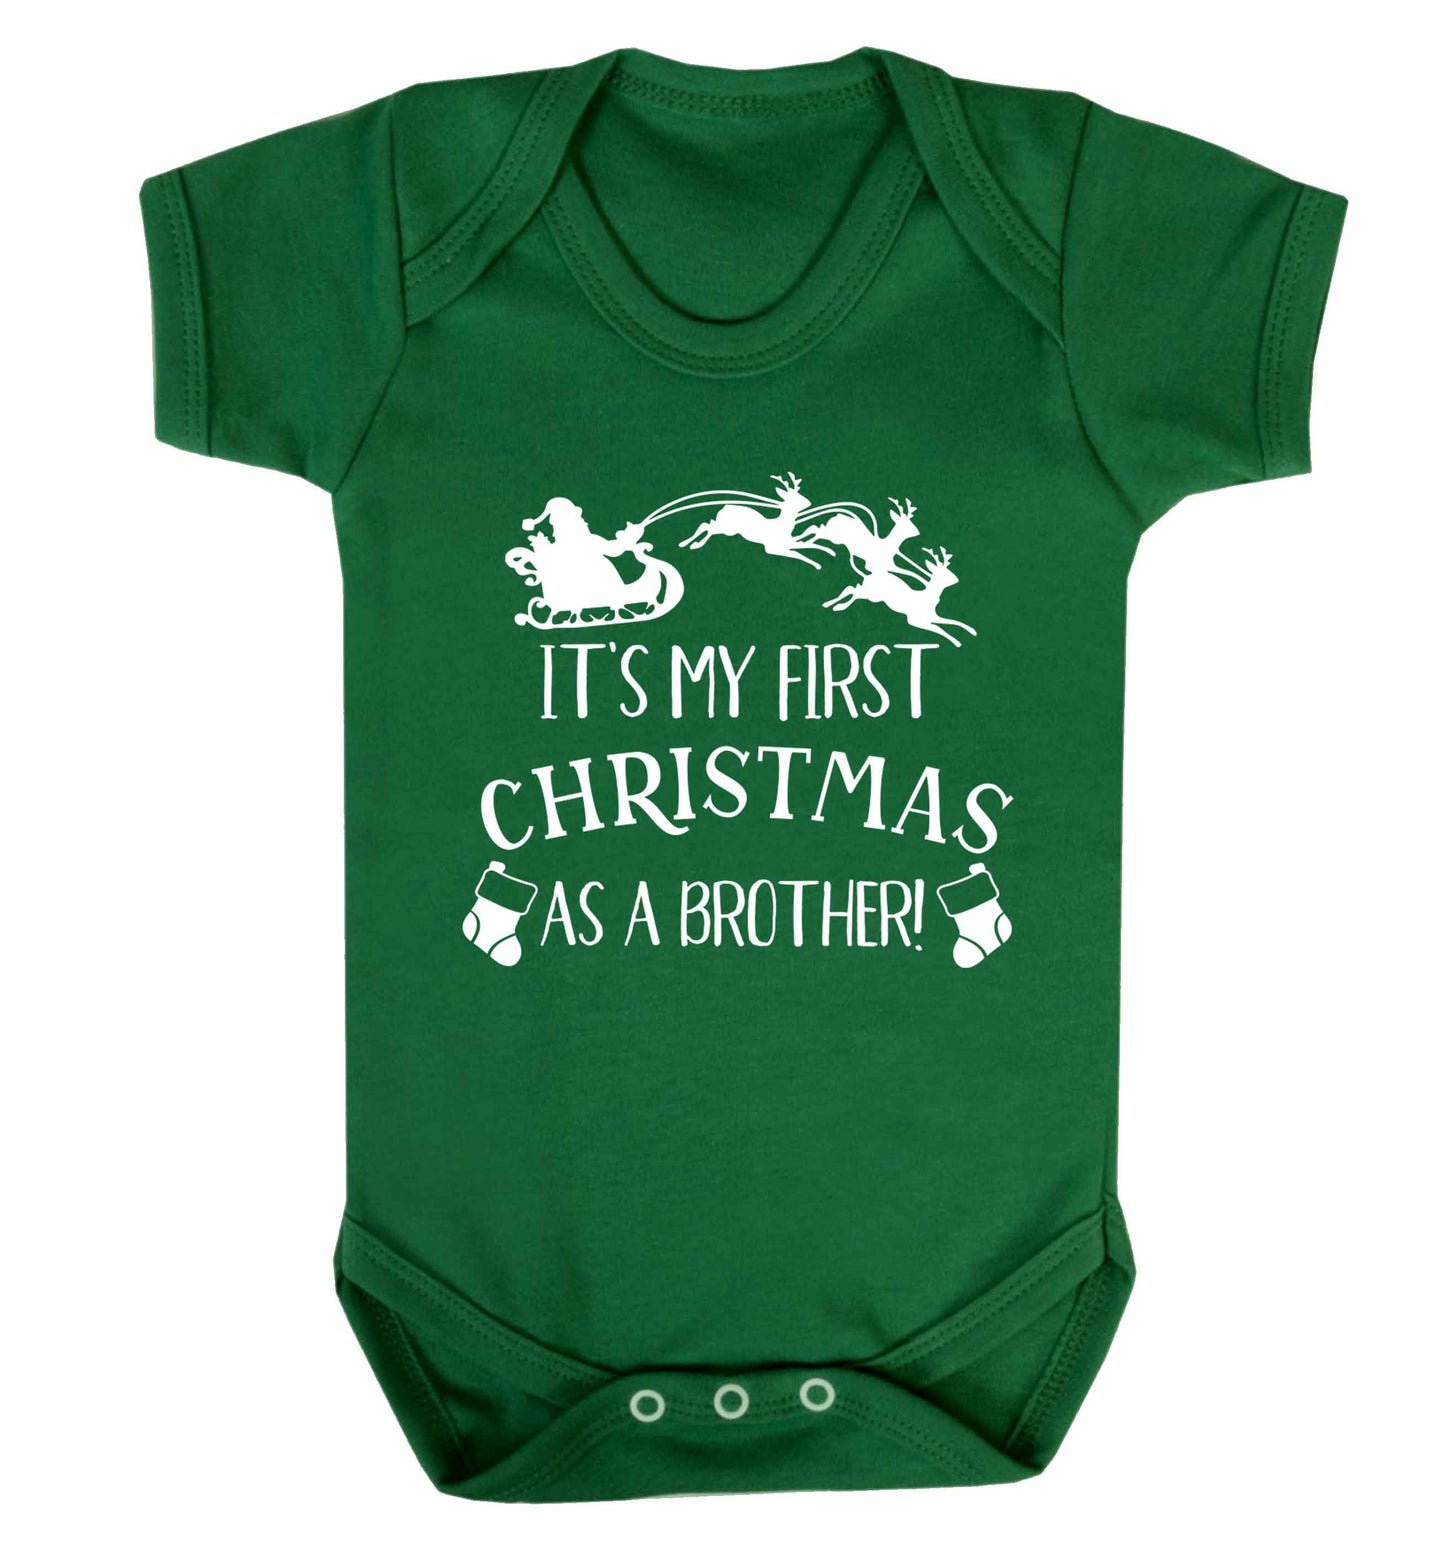 It's my first Christmas as a brother! Baby Vest green 18-24 months